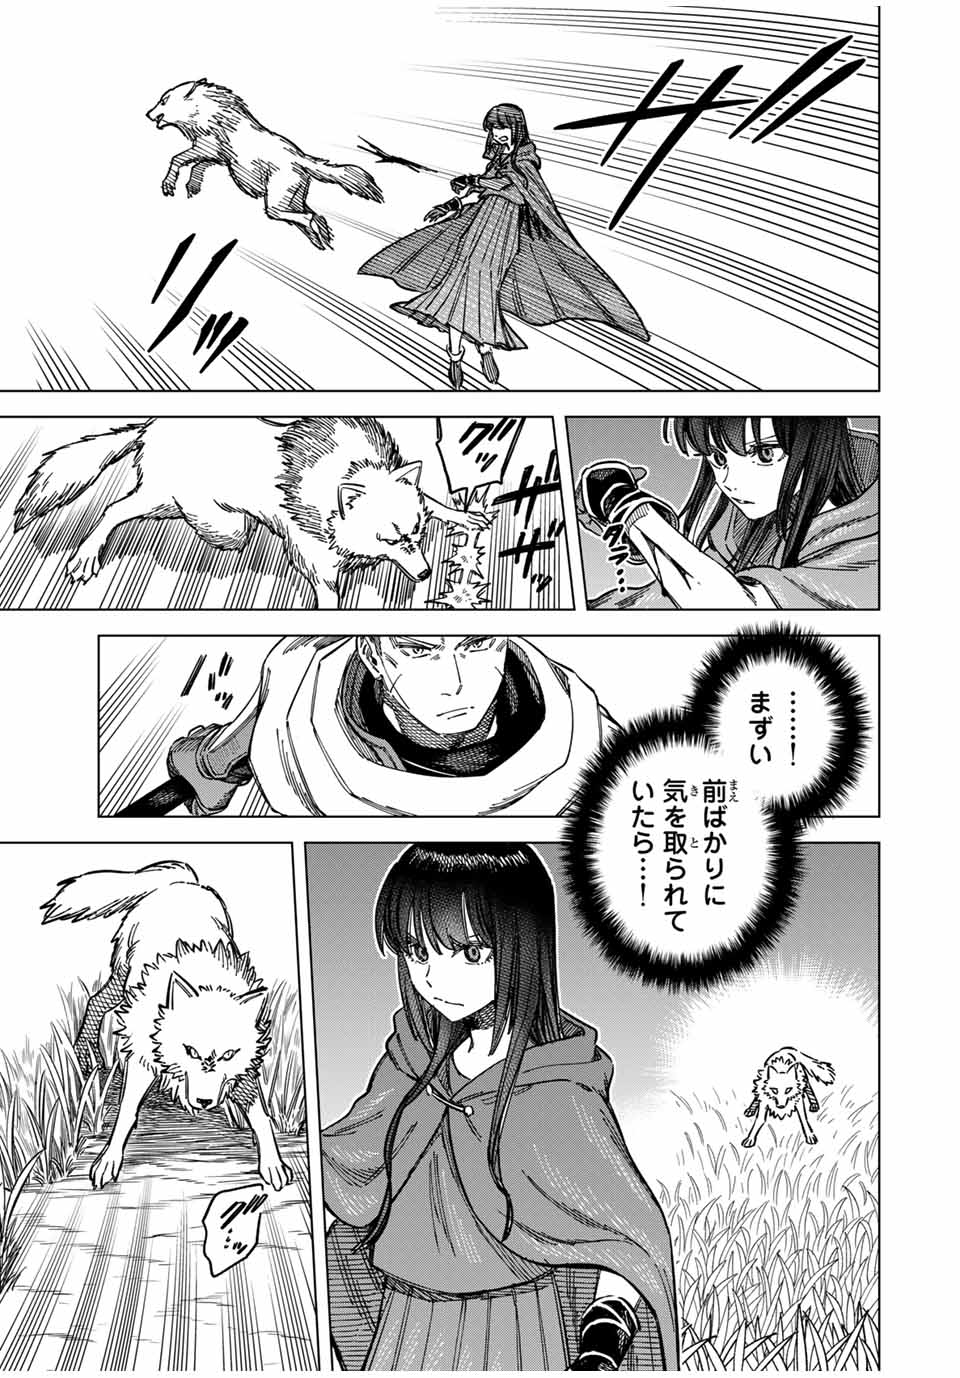 Witch and Mercenary 魔女と傭兵 第5.5話 - Page 5